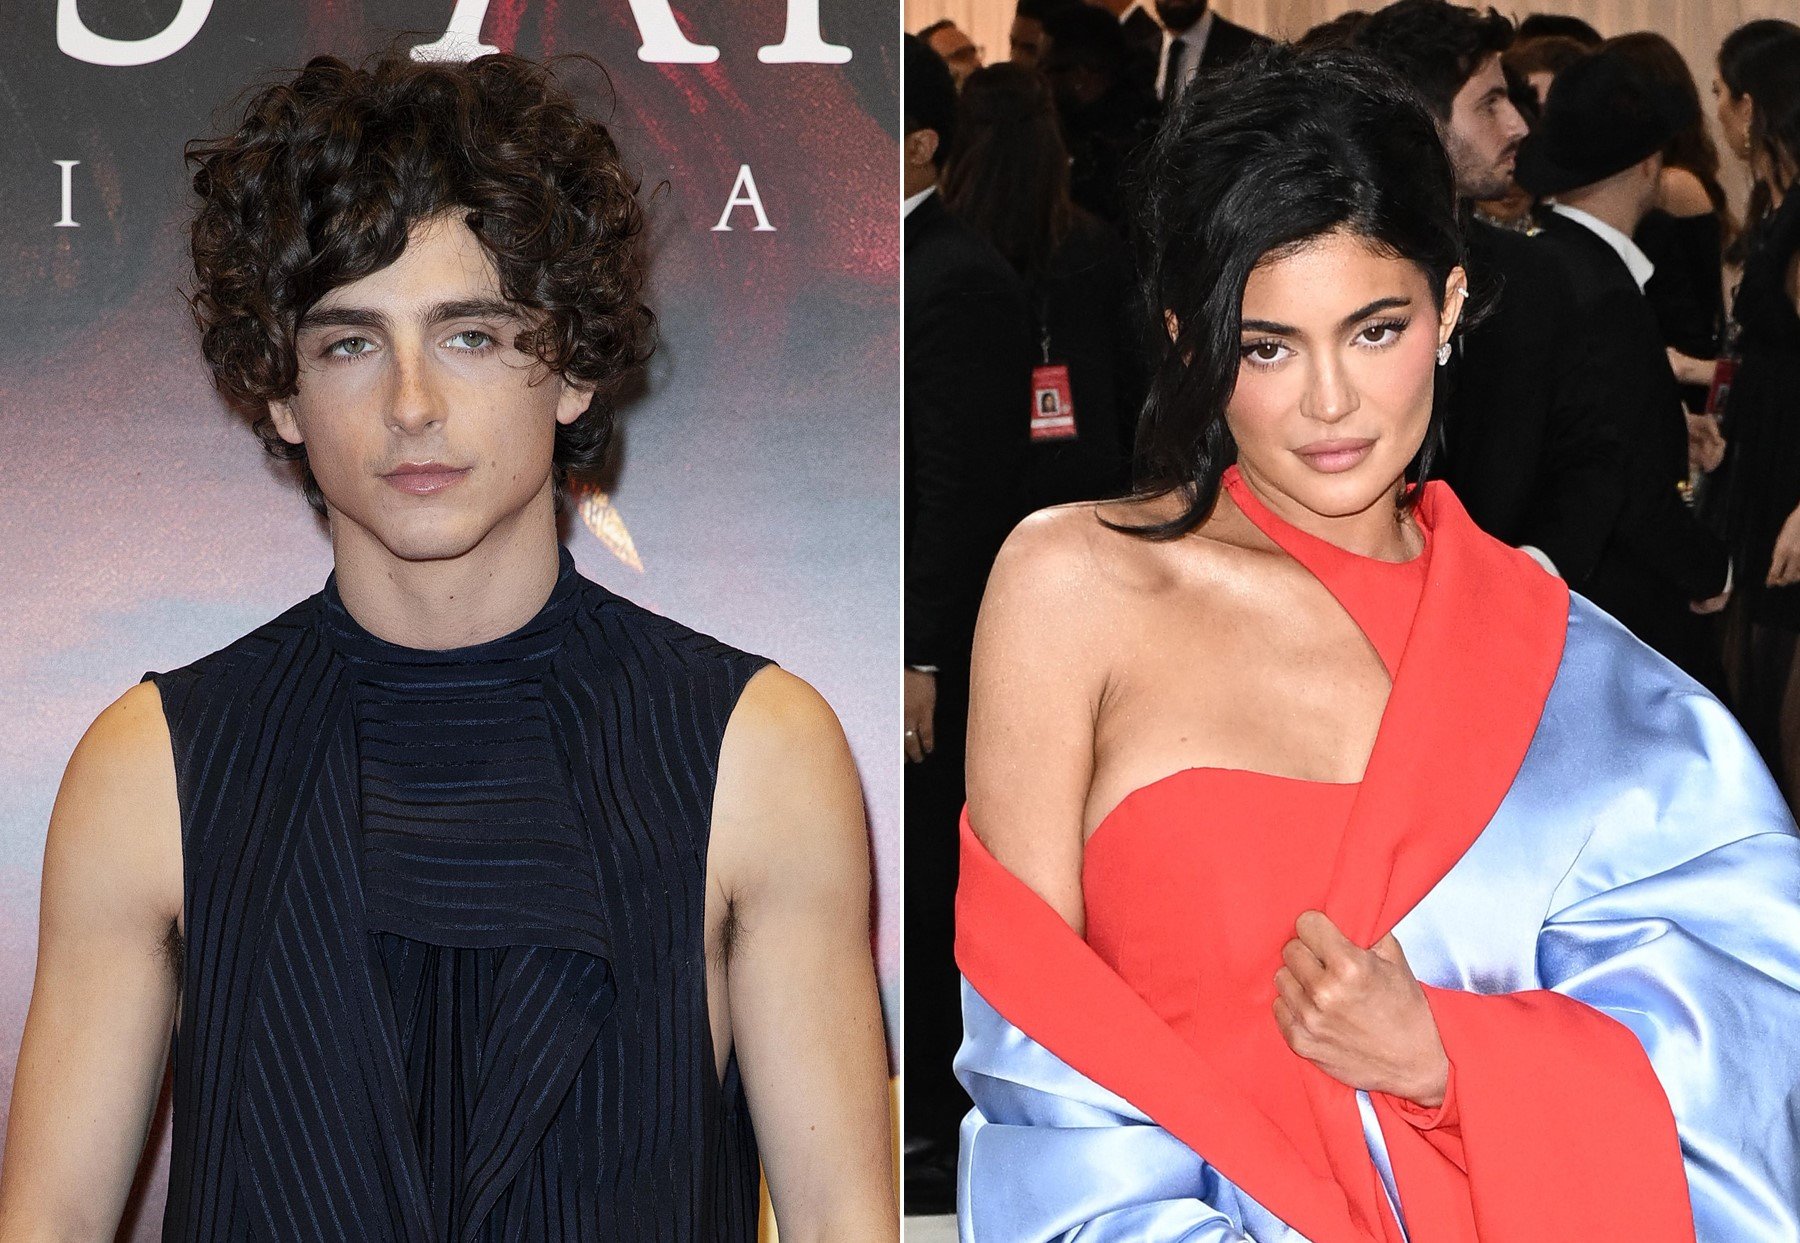 Page Six gives us a look at first photos of Timothée Chalamet and Kylie